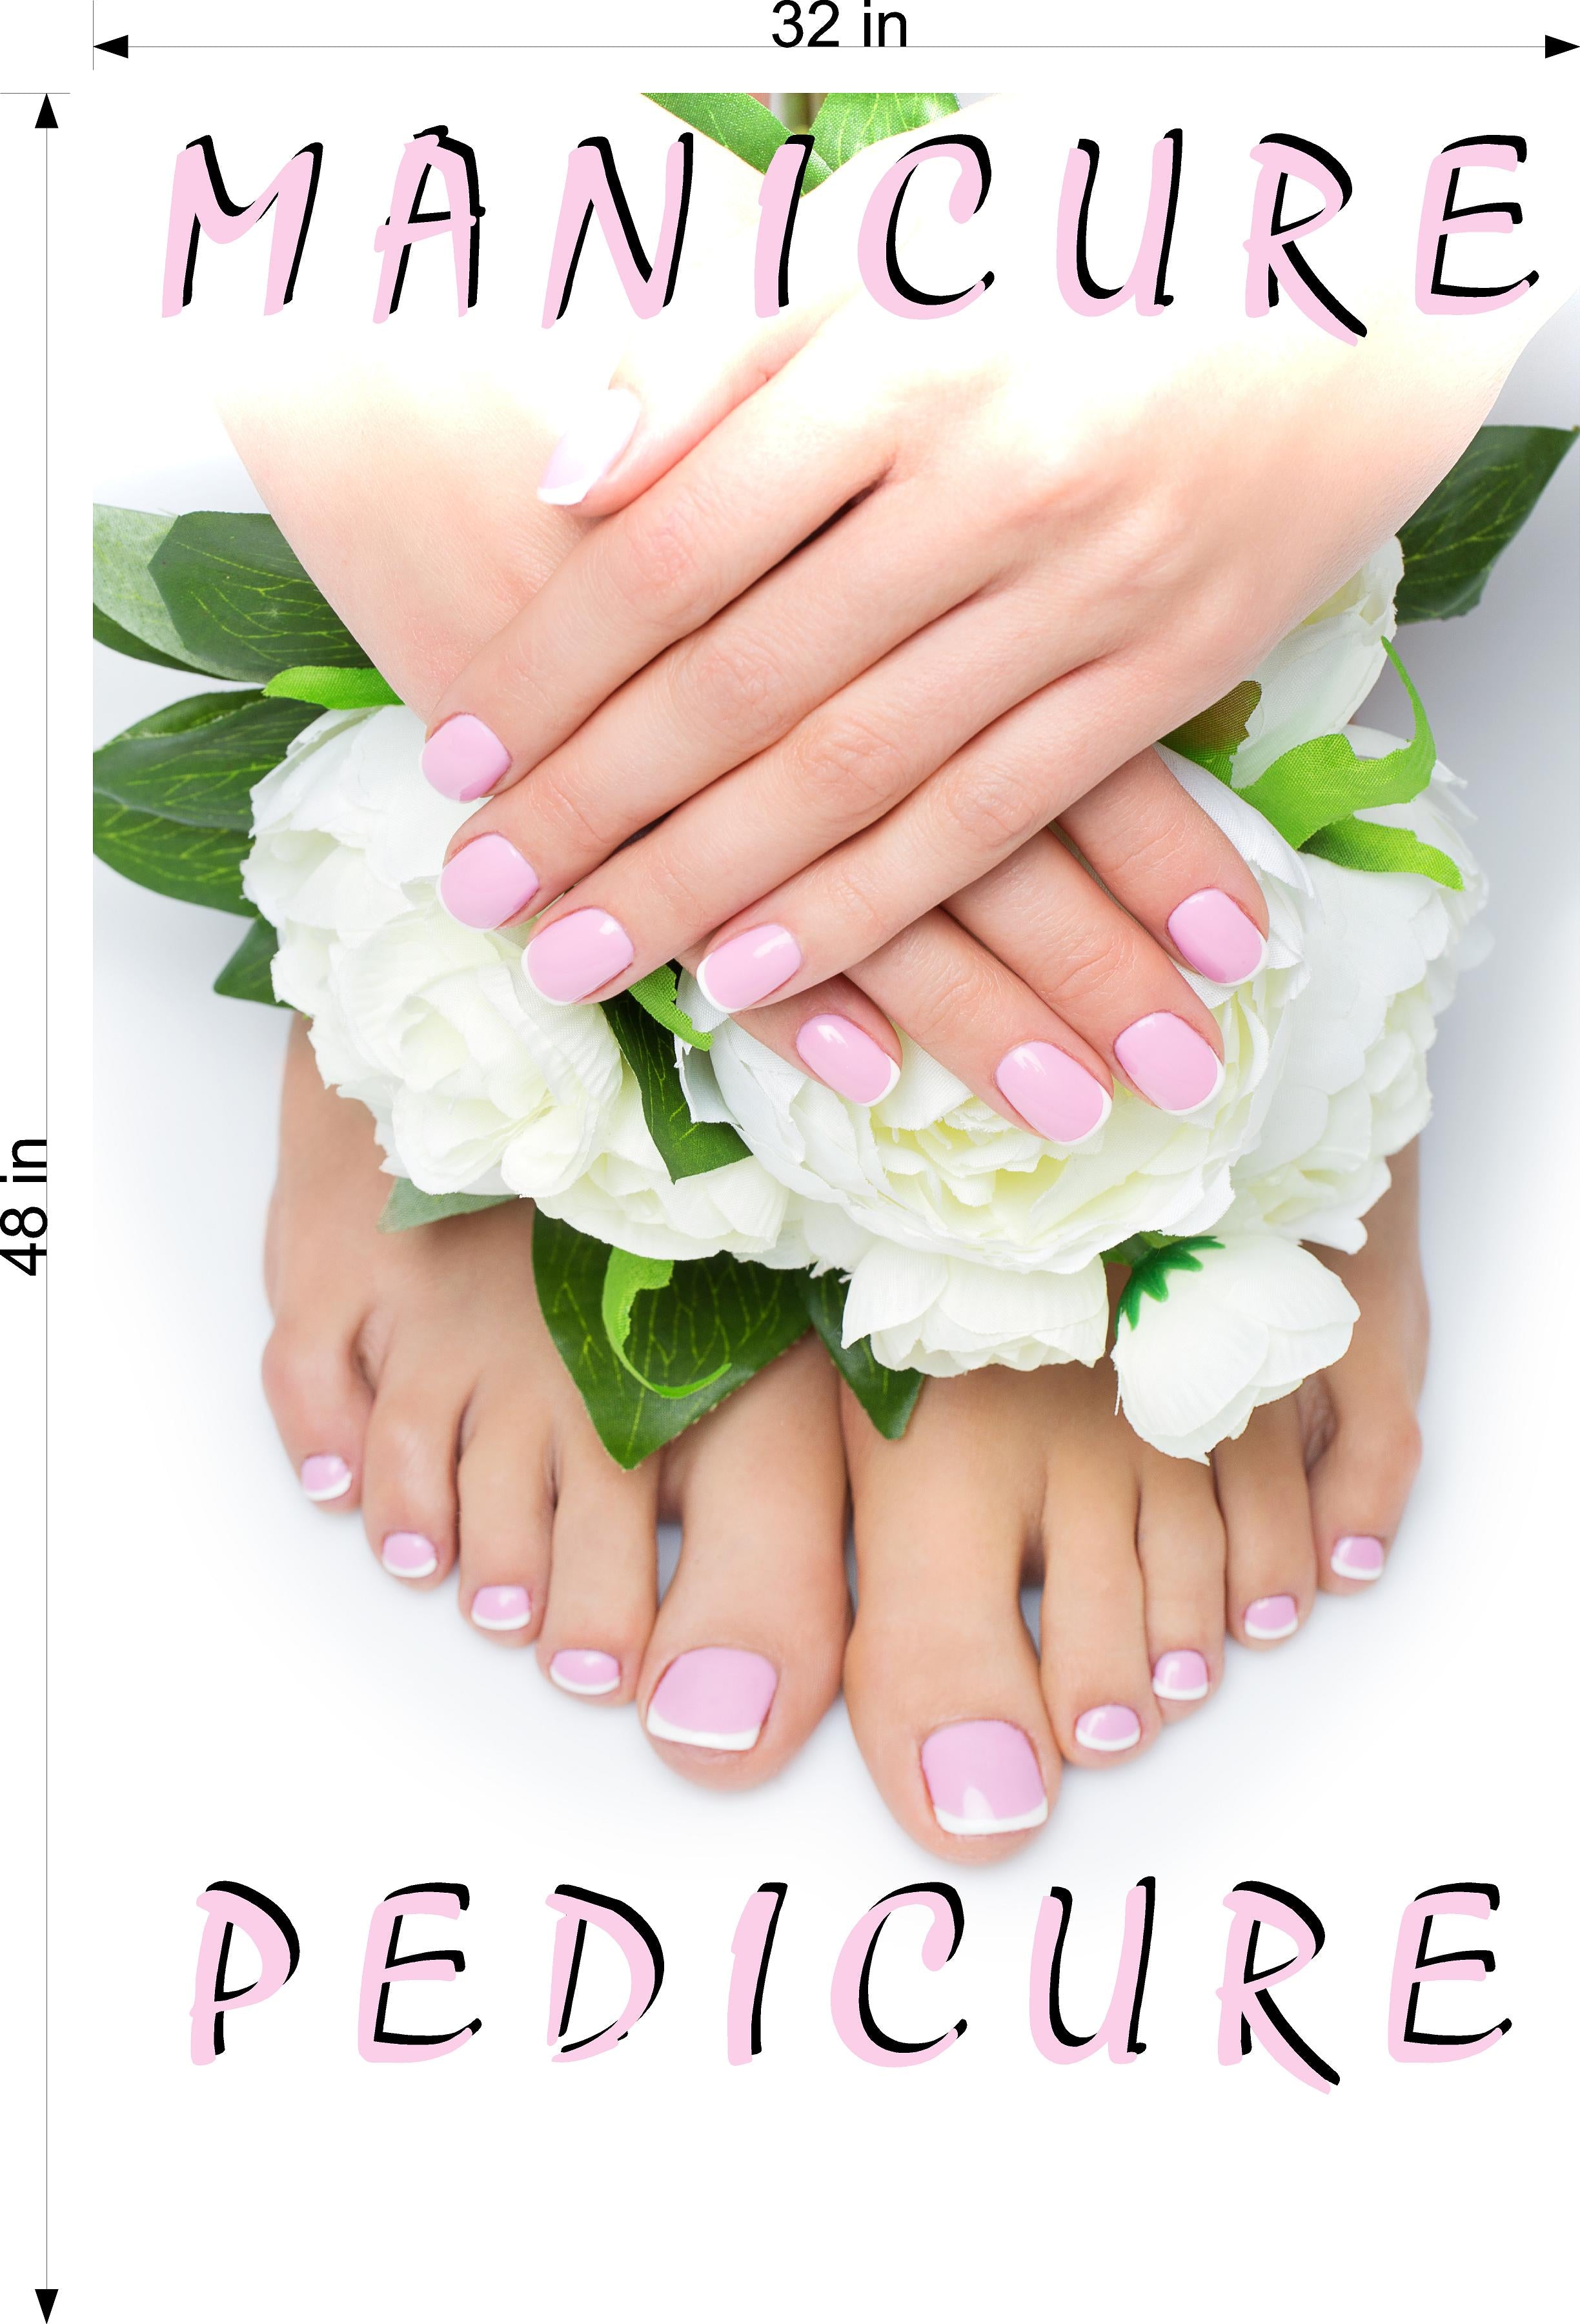 Pedicure & Manicure 11 Perforated Mesh One Way Vision See-Through Window Vinyl Nail Salon Sign Vertical